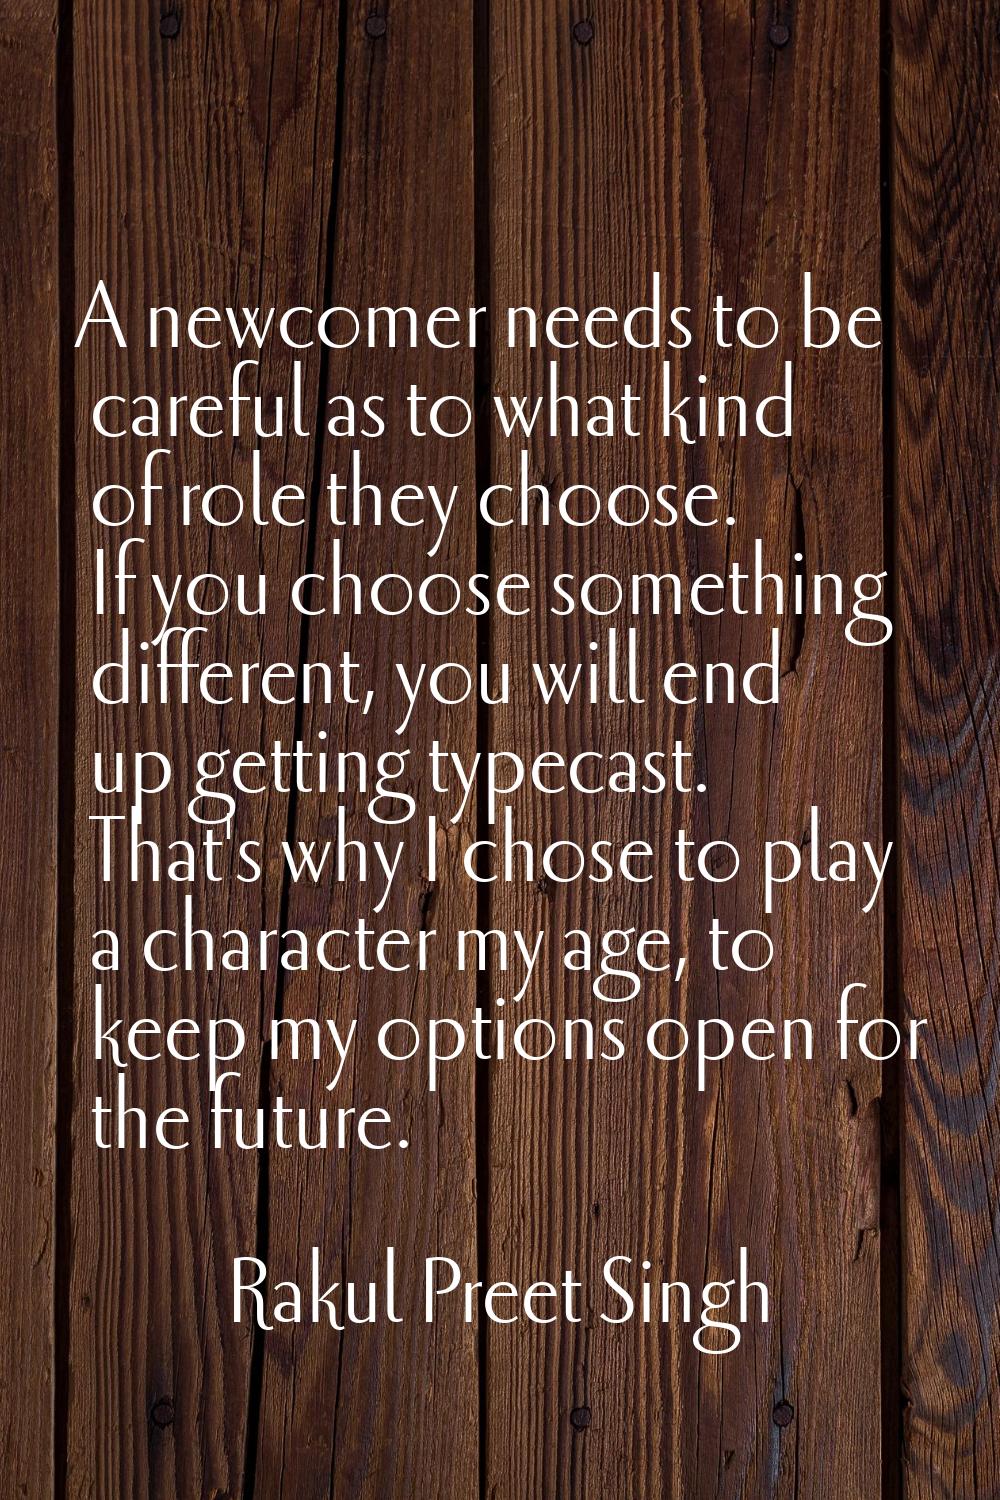 A newcomer needs to be careful as to what kind of role they choose. If you choose something differe